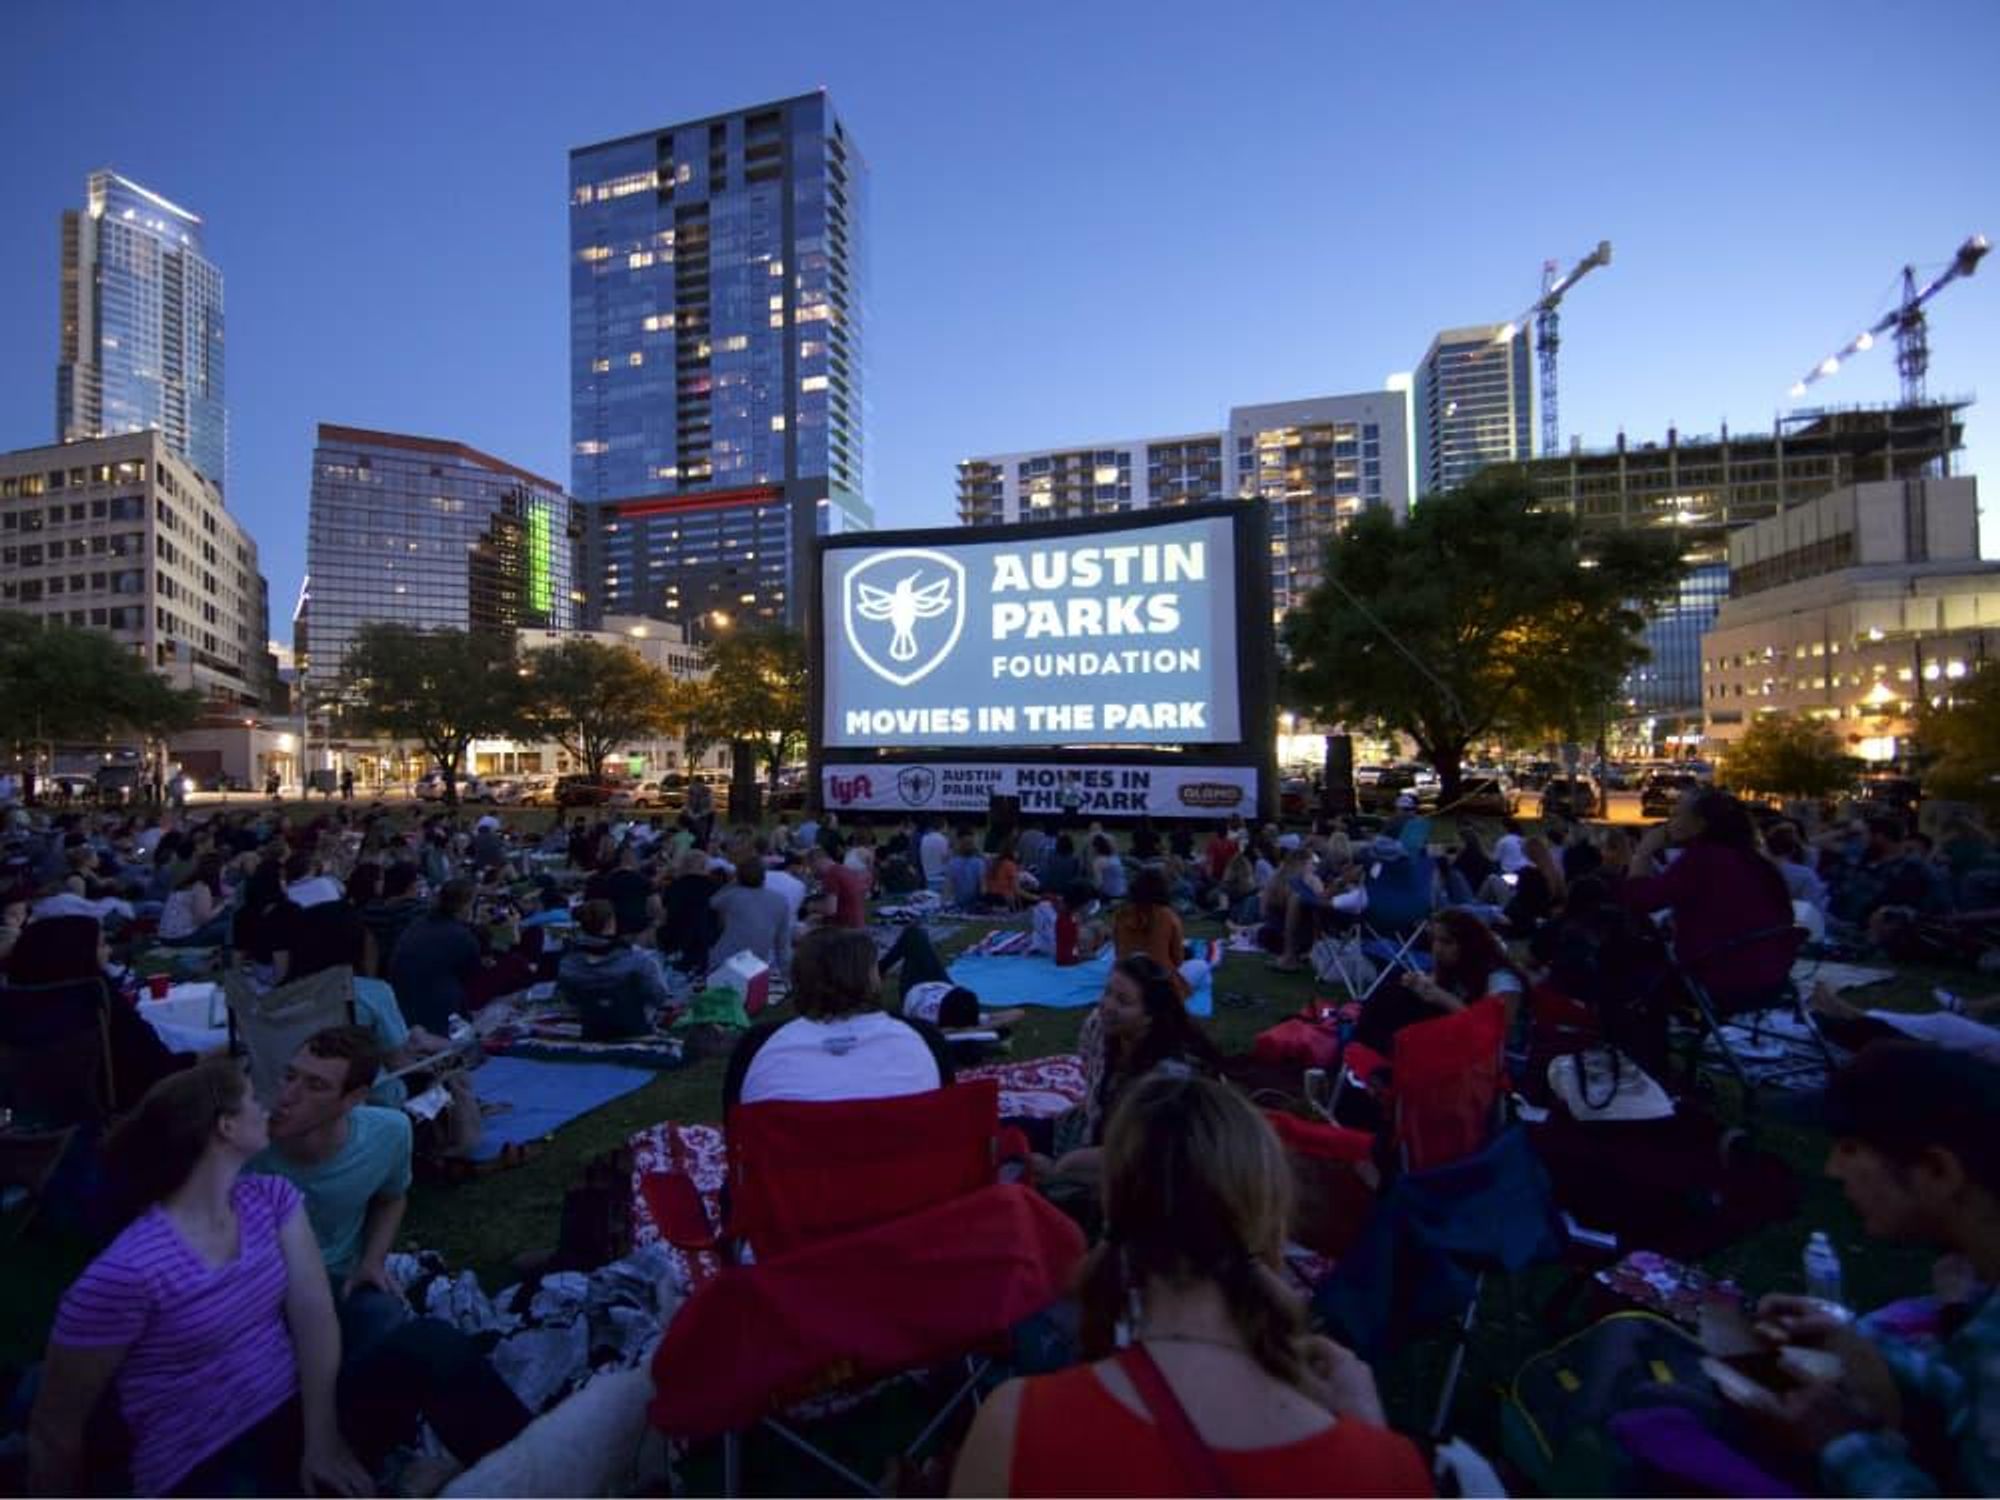 Austin Parks Foundation movies in the park